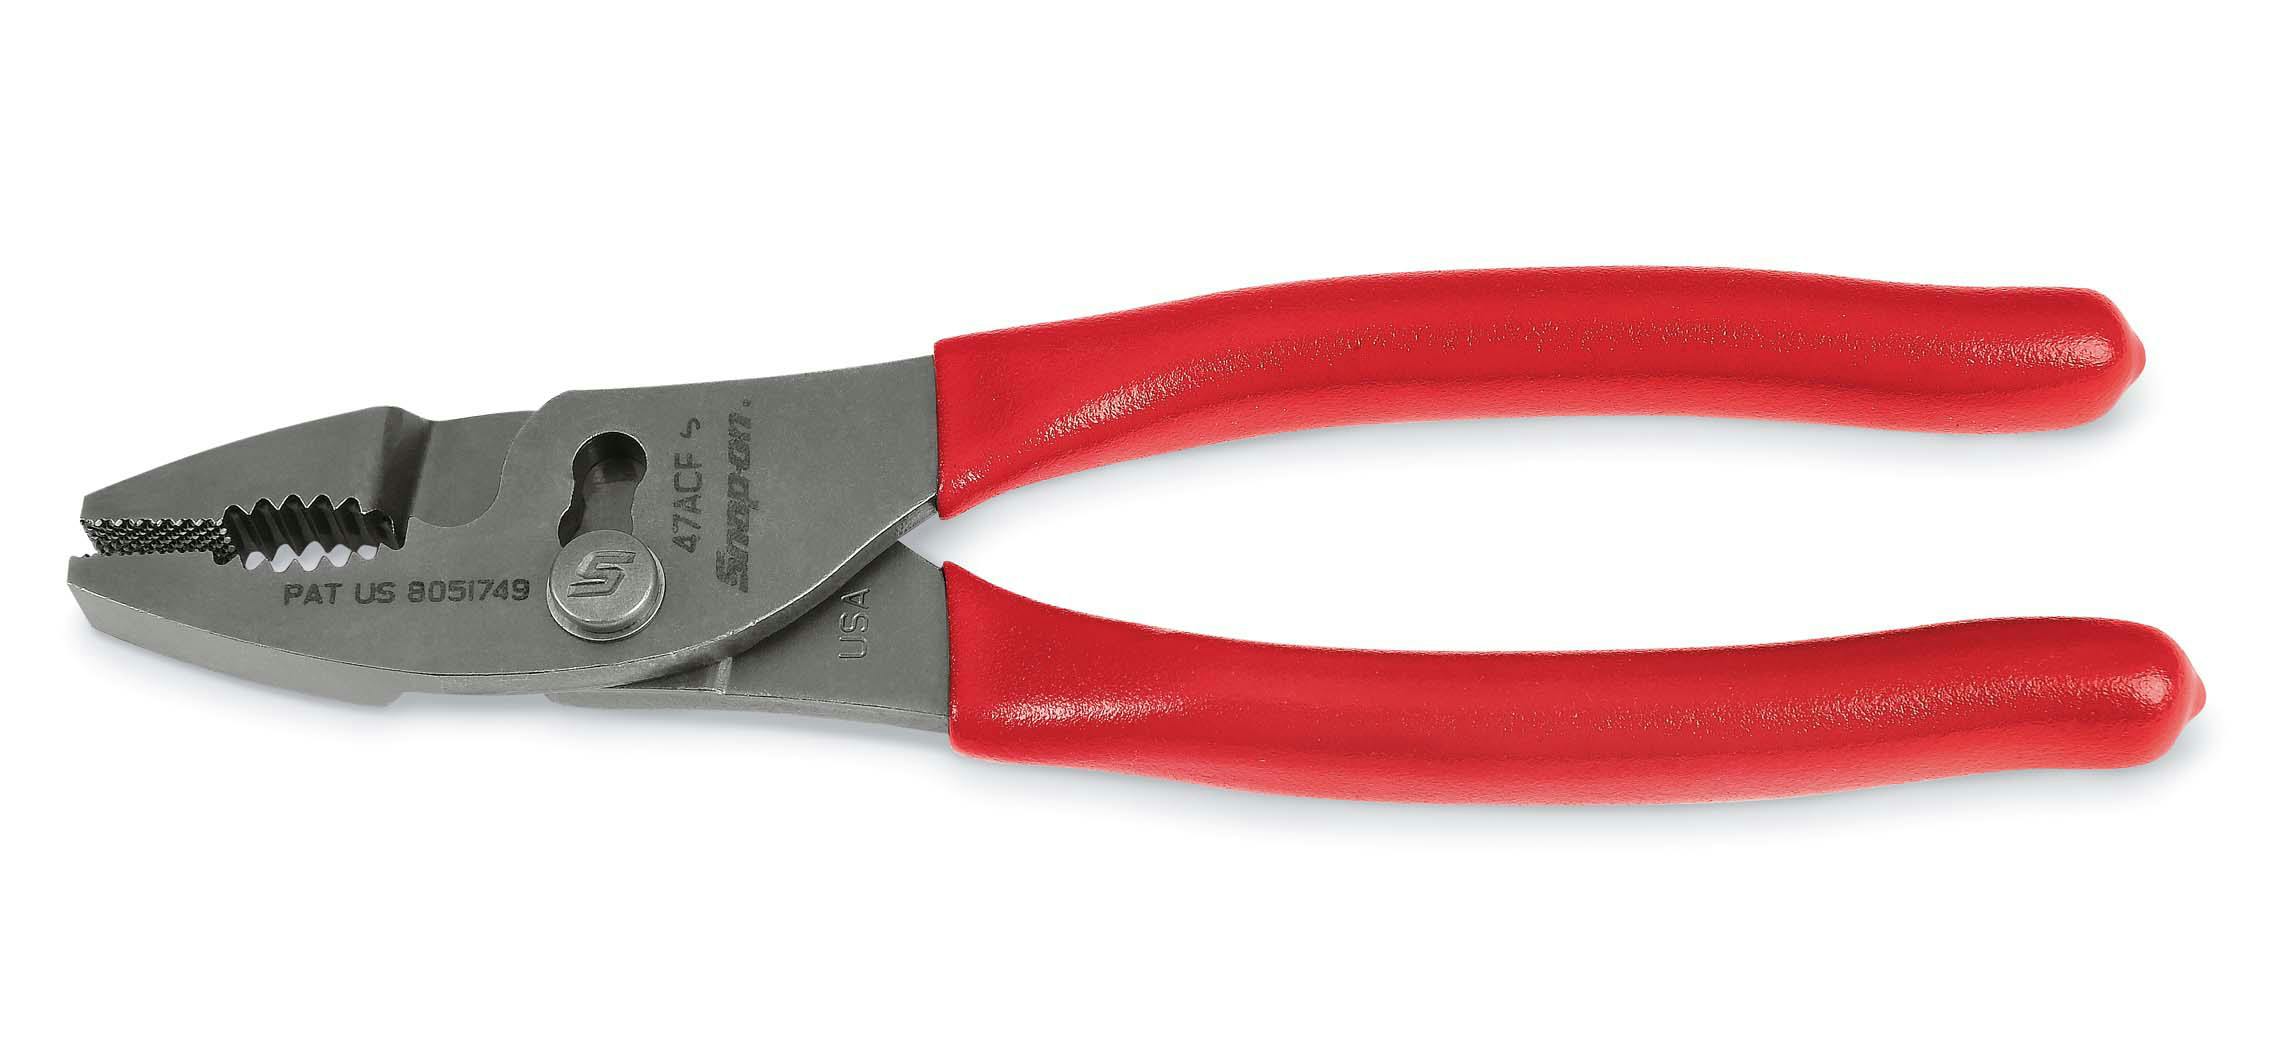 Snap-on 47CF 24" RED Slip Joint Pliers Promo Wall Mountable Display SPP939-R 